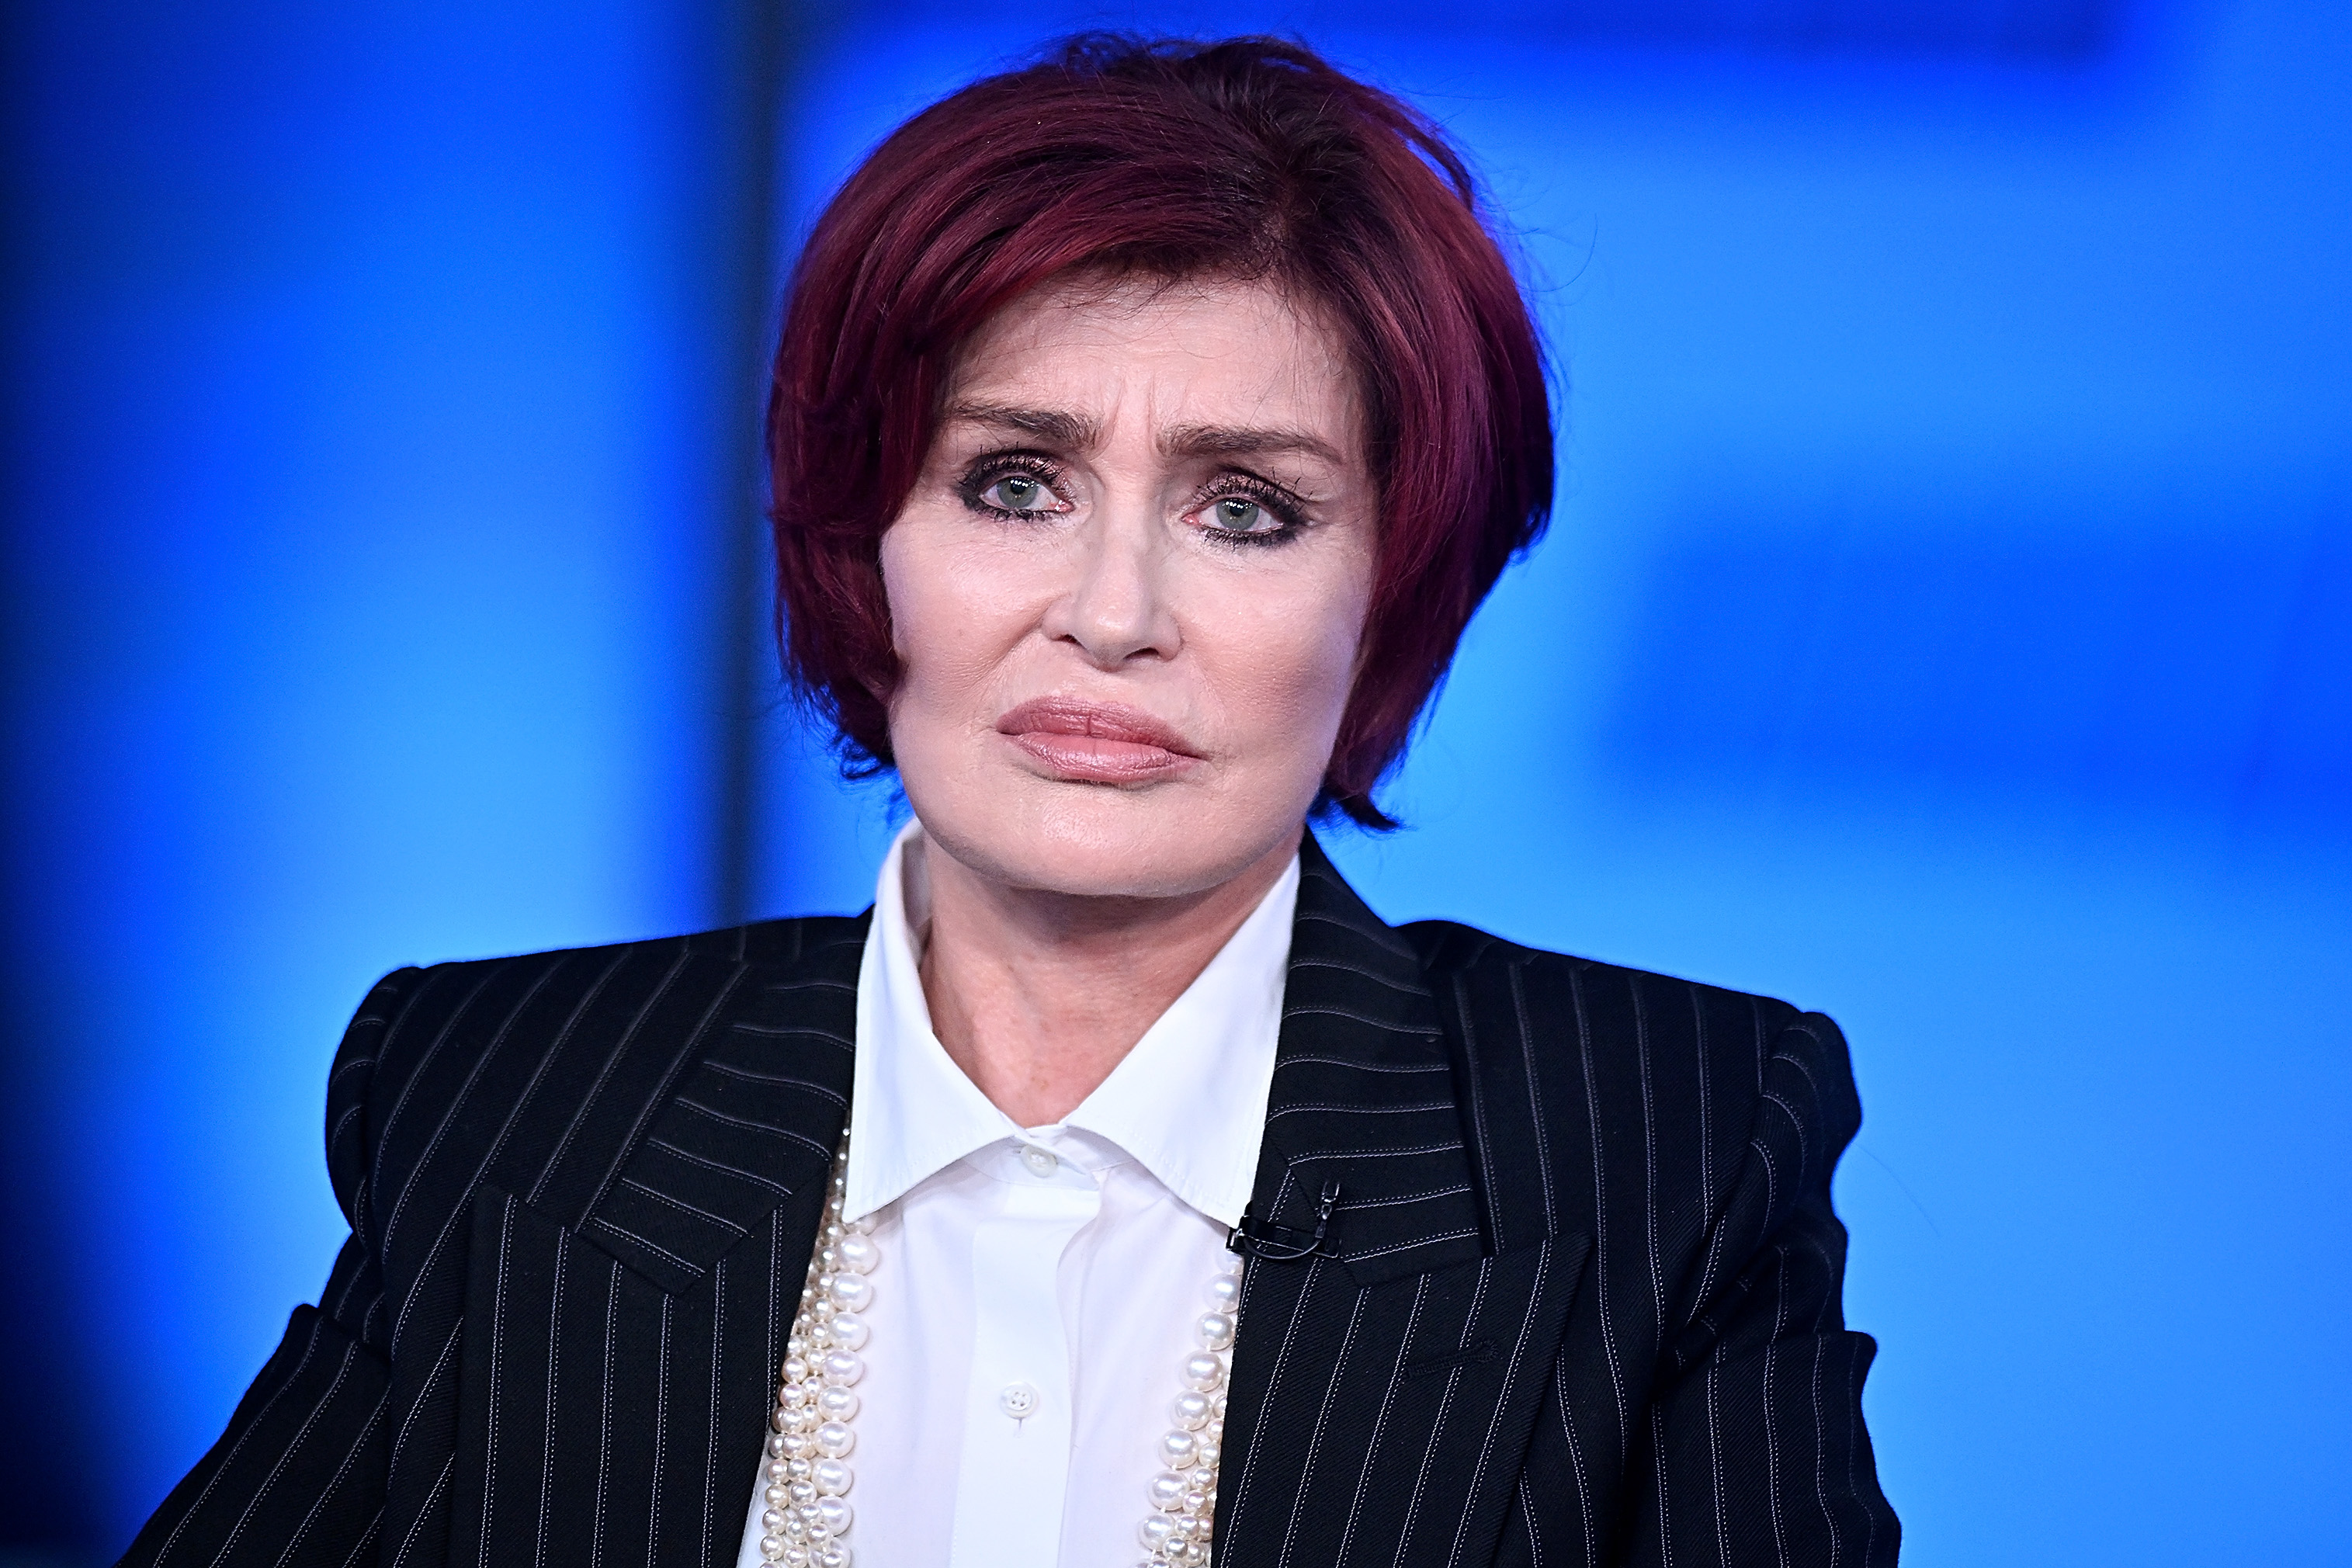 Sharon Osbourne discussing her Fox Nation series “Sharon Osbourne: To Hell & Back” on “The Five” at FOX News Channel Studios on September 27, 2022 in New York City | Source: Getty Images